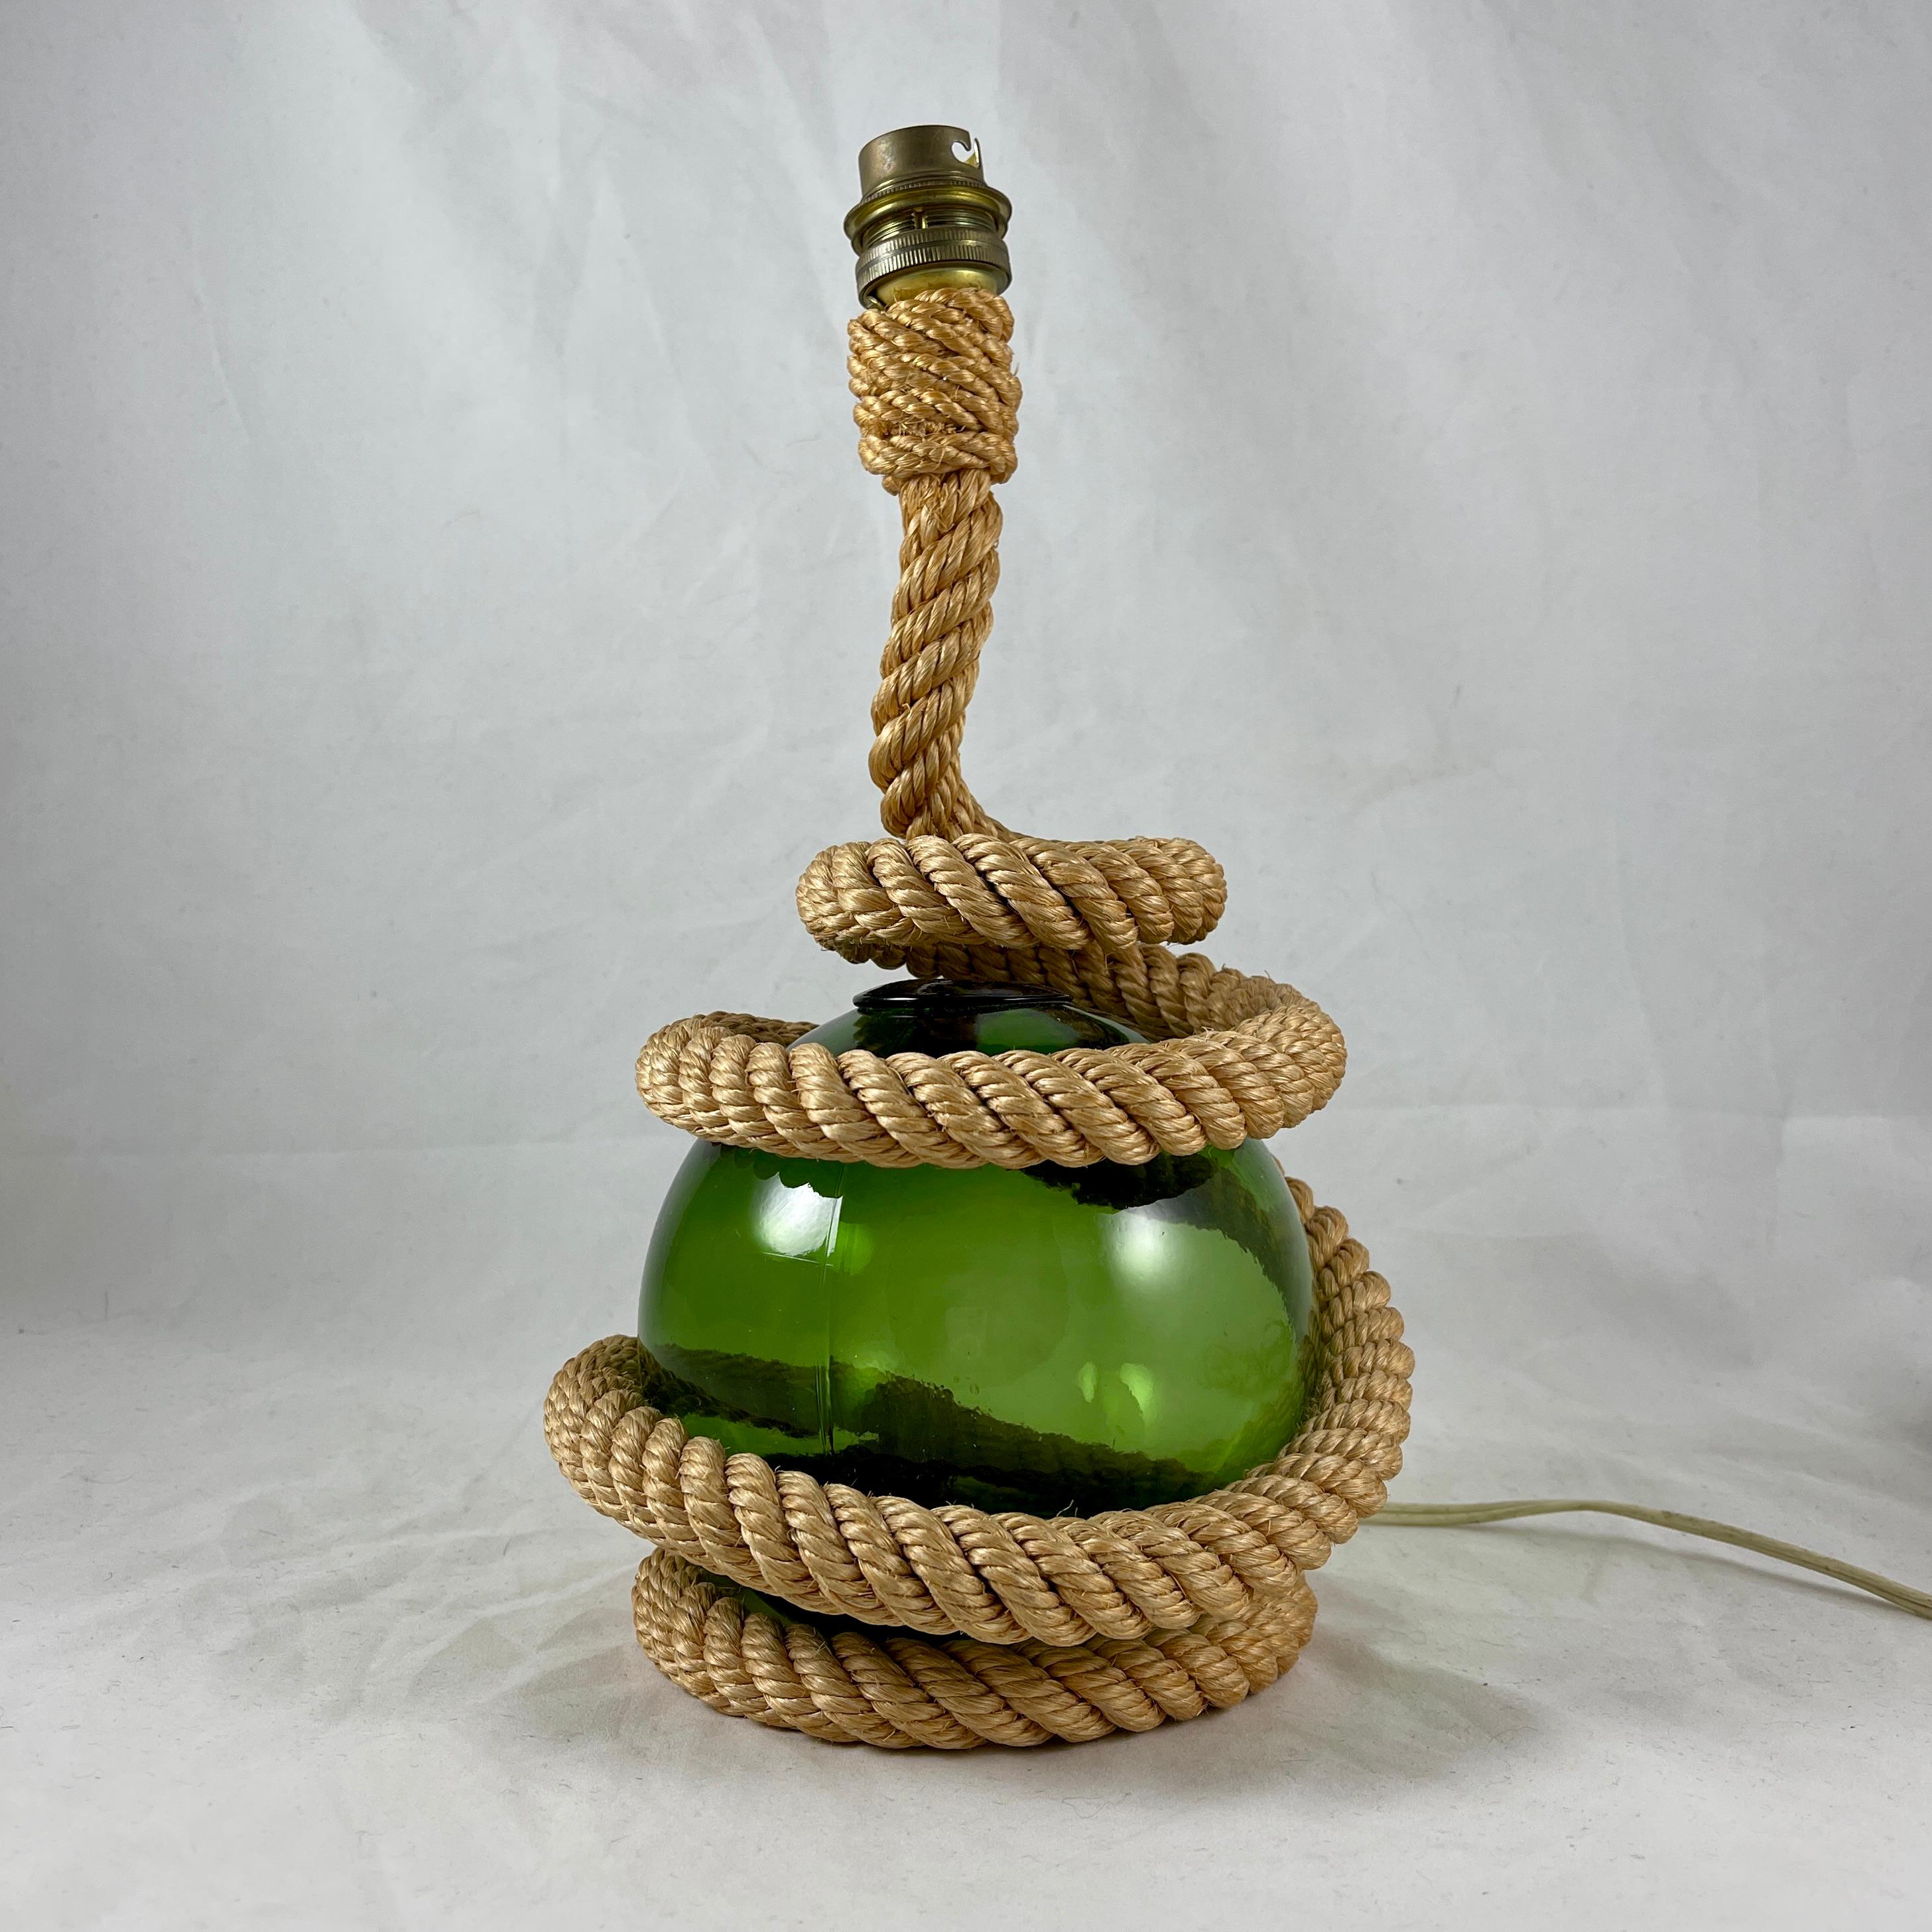 A mid-century French Riviera Marine themed Audoux Minet table lamp, circa 1960.

An Iconic design – a green blown glass ball modeled on the buoys used by French fisherman on the Côte d’Azur to float their nets, nestles in a rustic rope spiral